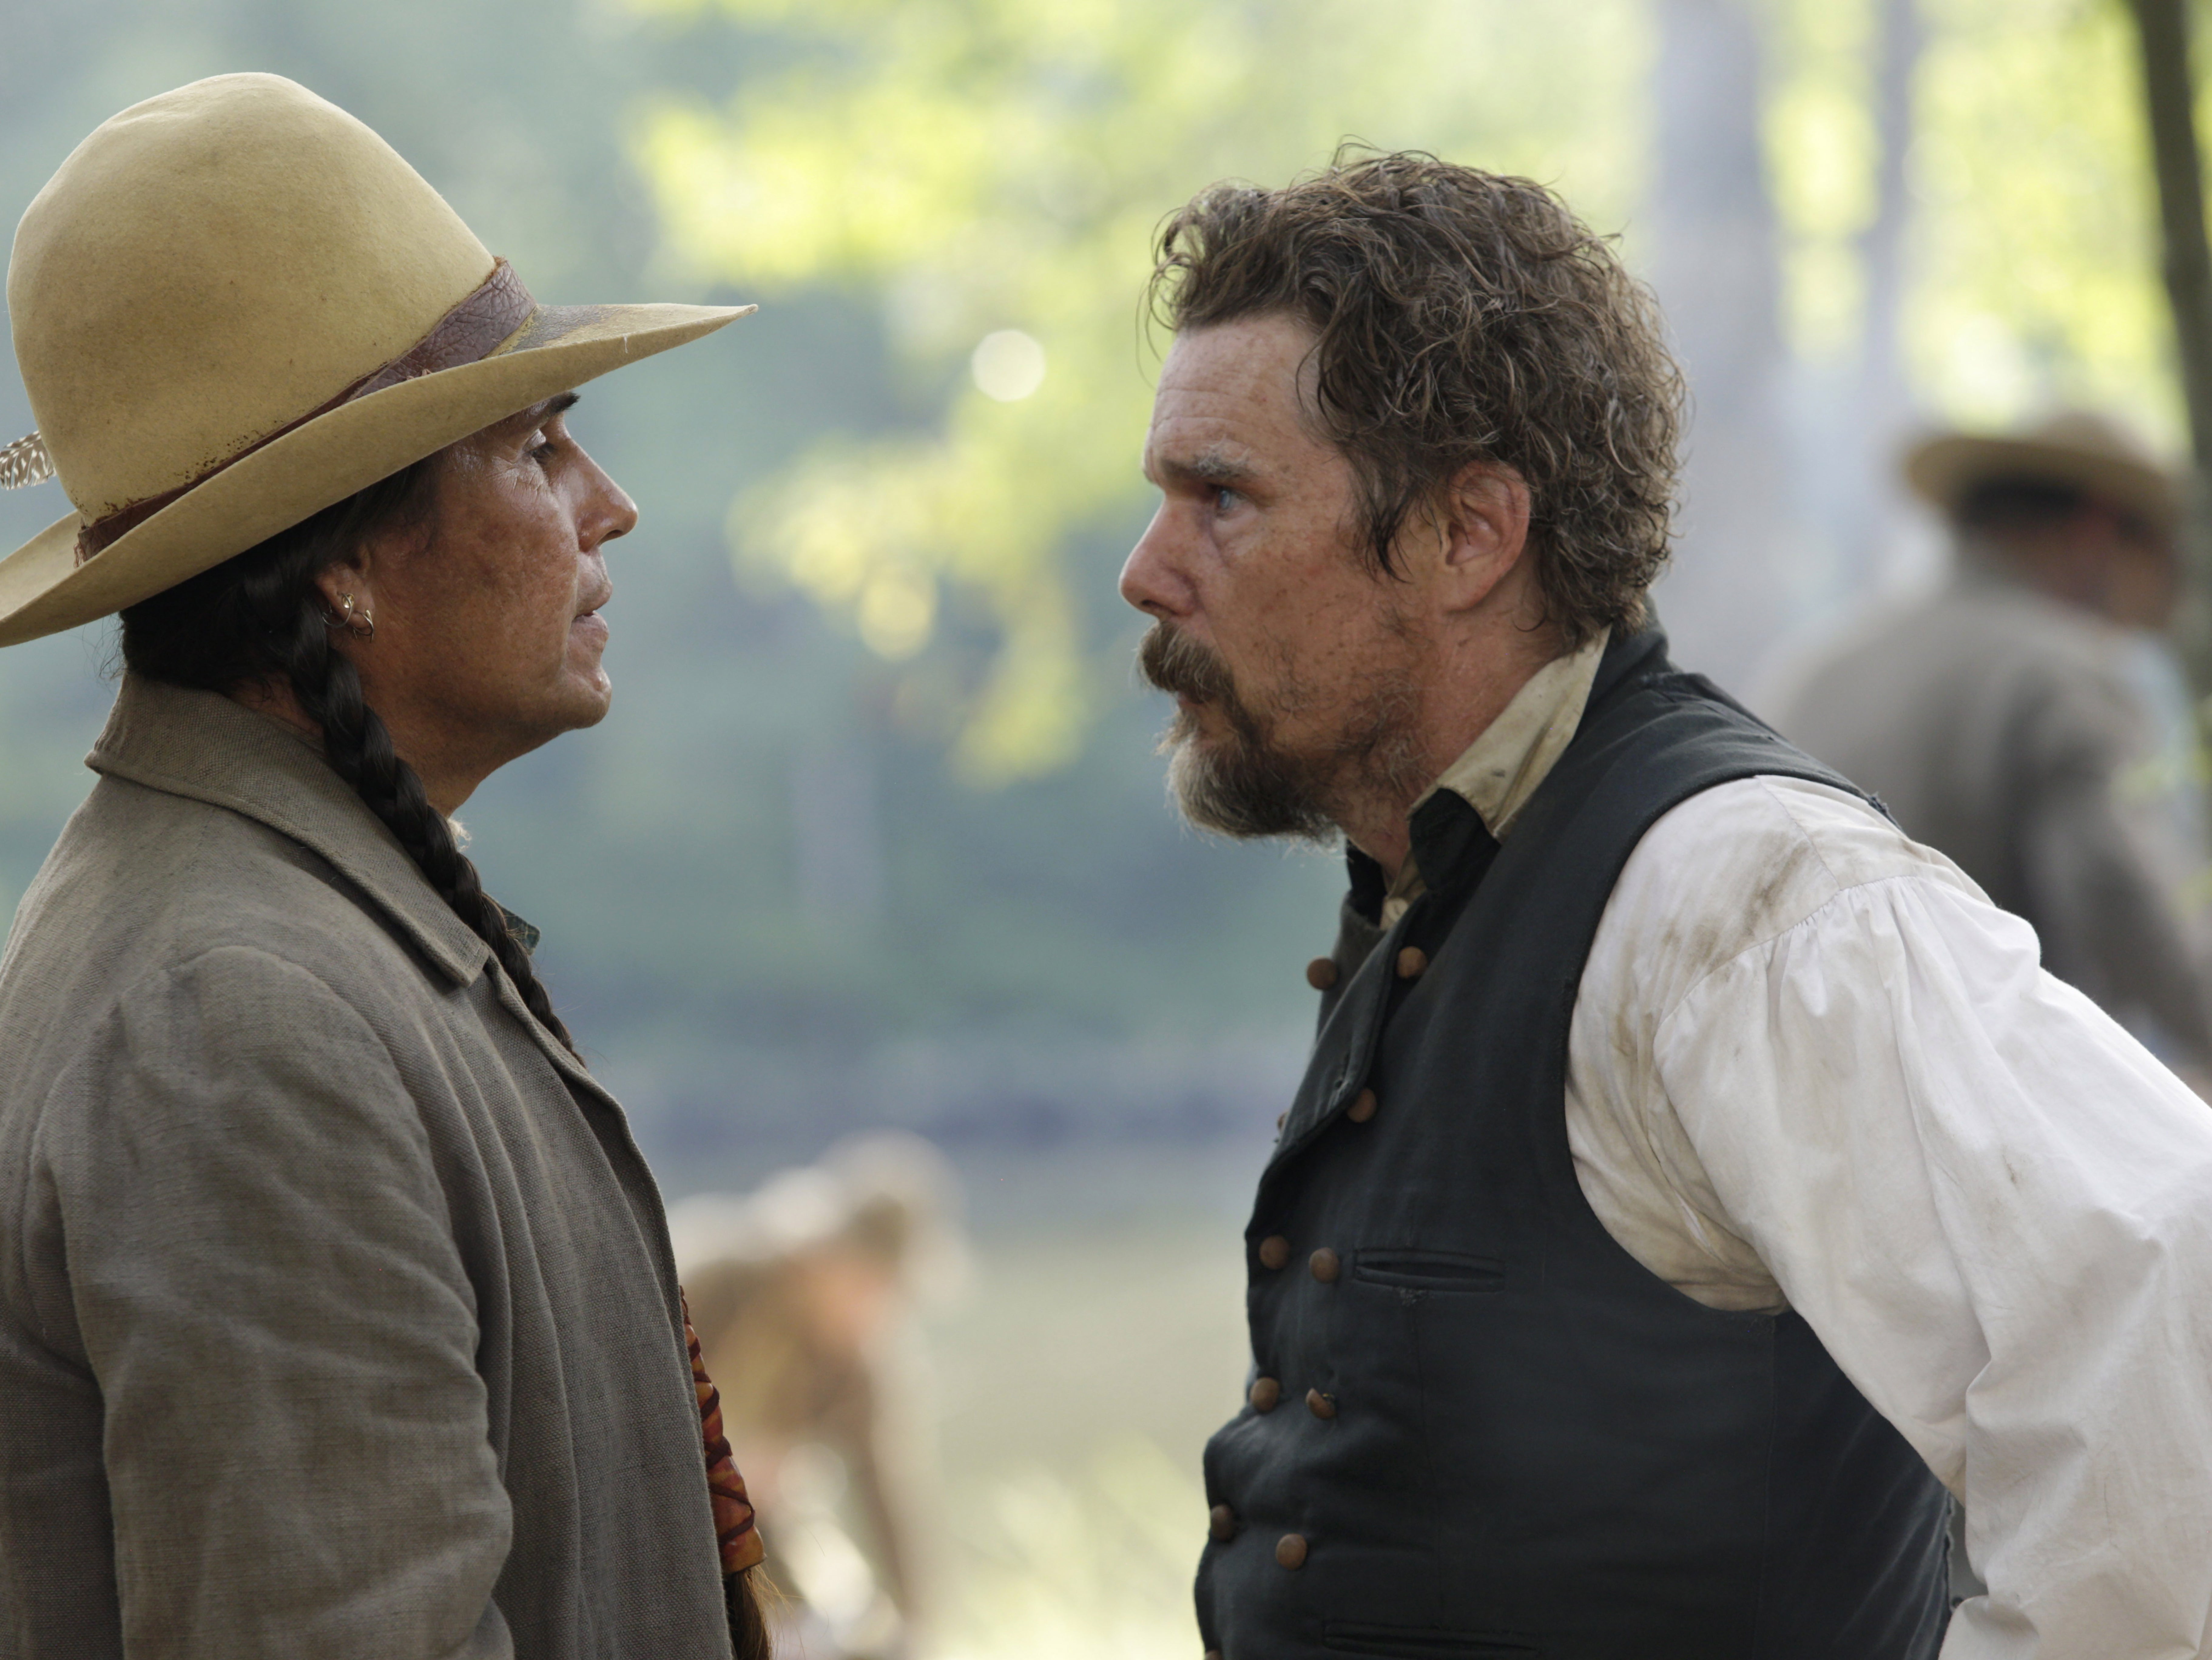 Mo Brings Plenty as Ottawa Jones and Ethan Hawke as John Brown in episode one of ‘The Good Lord Bird’